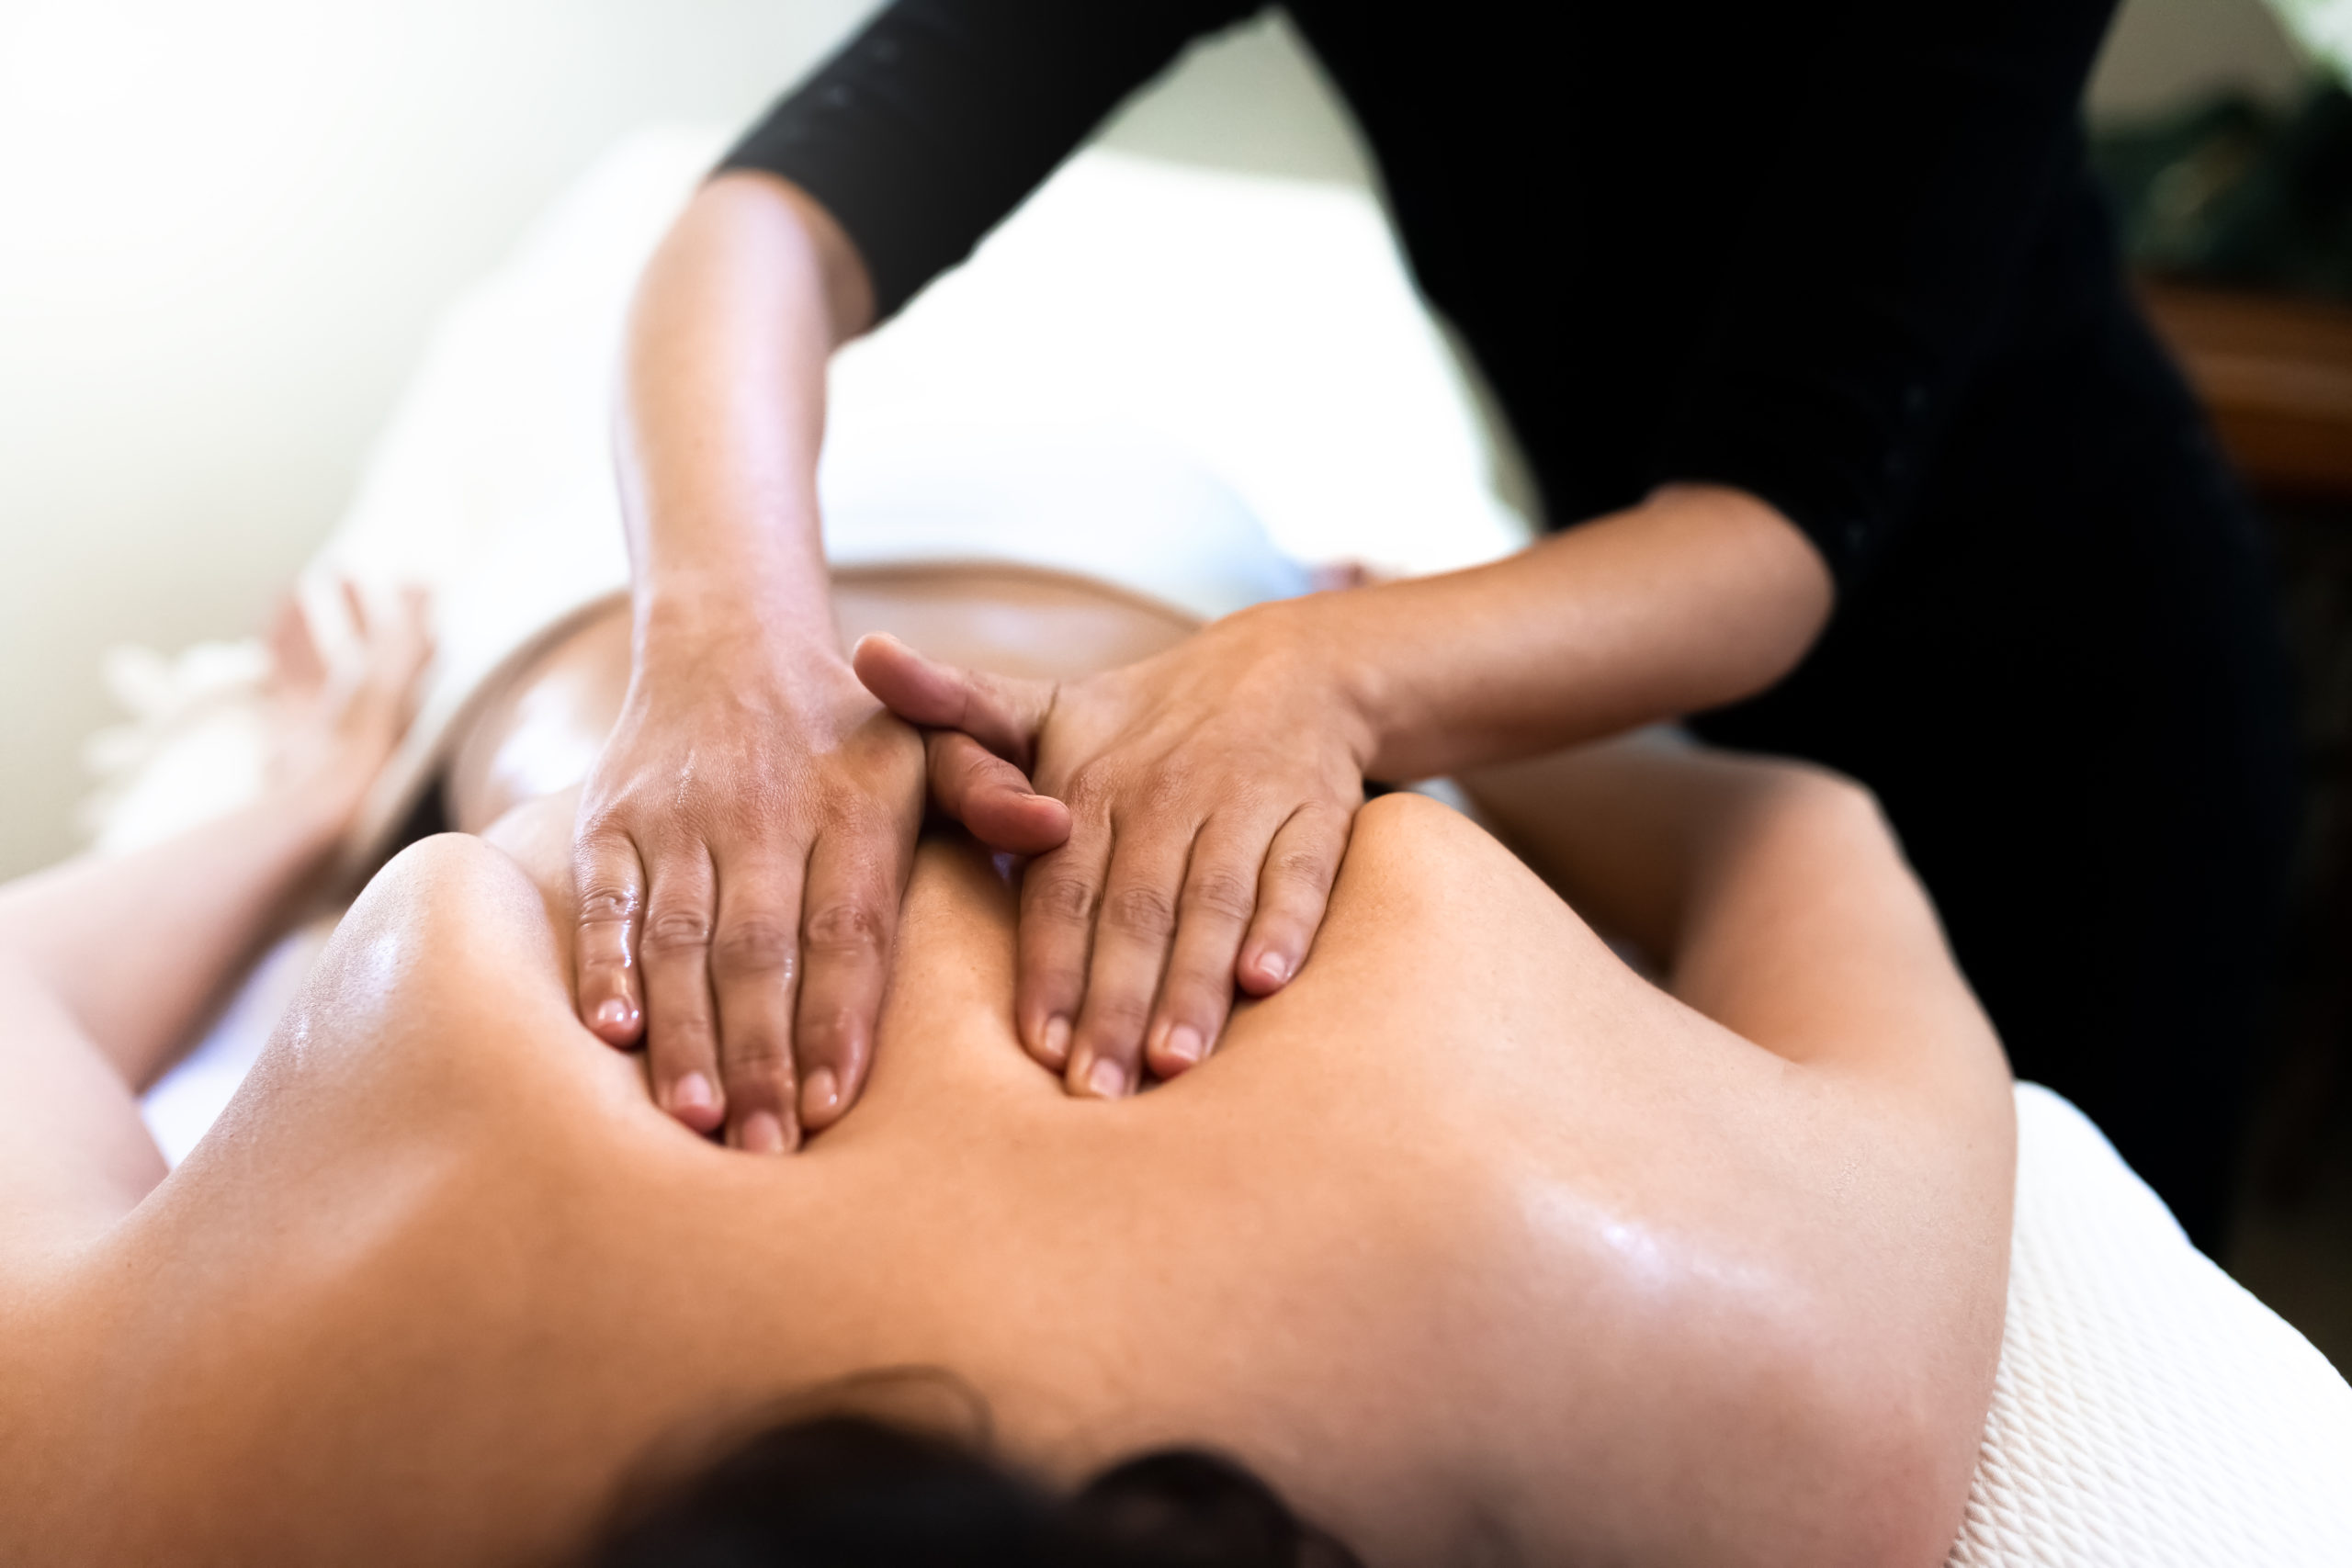 Female therapist giving back massage to young woman. Close up hands.